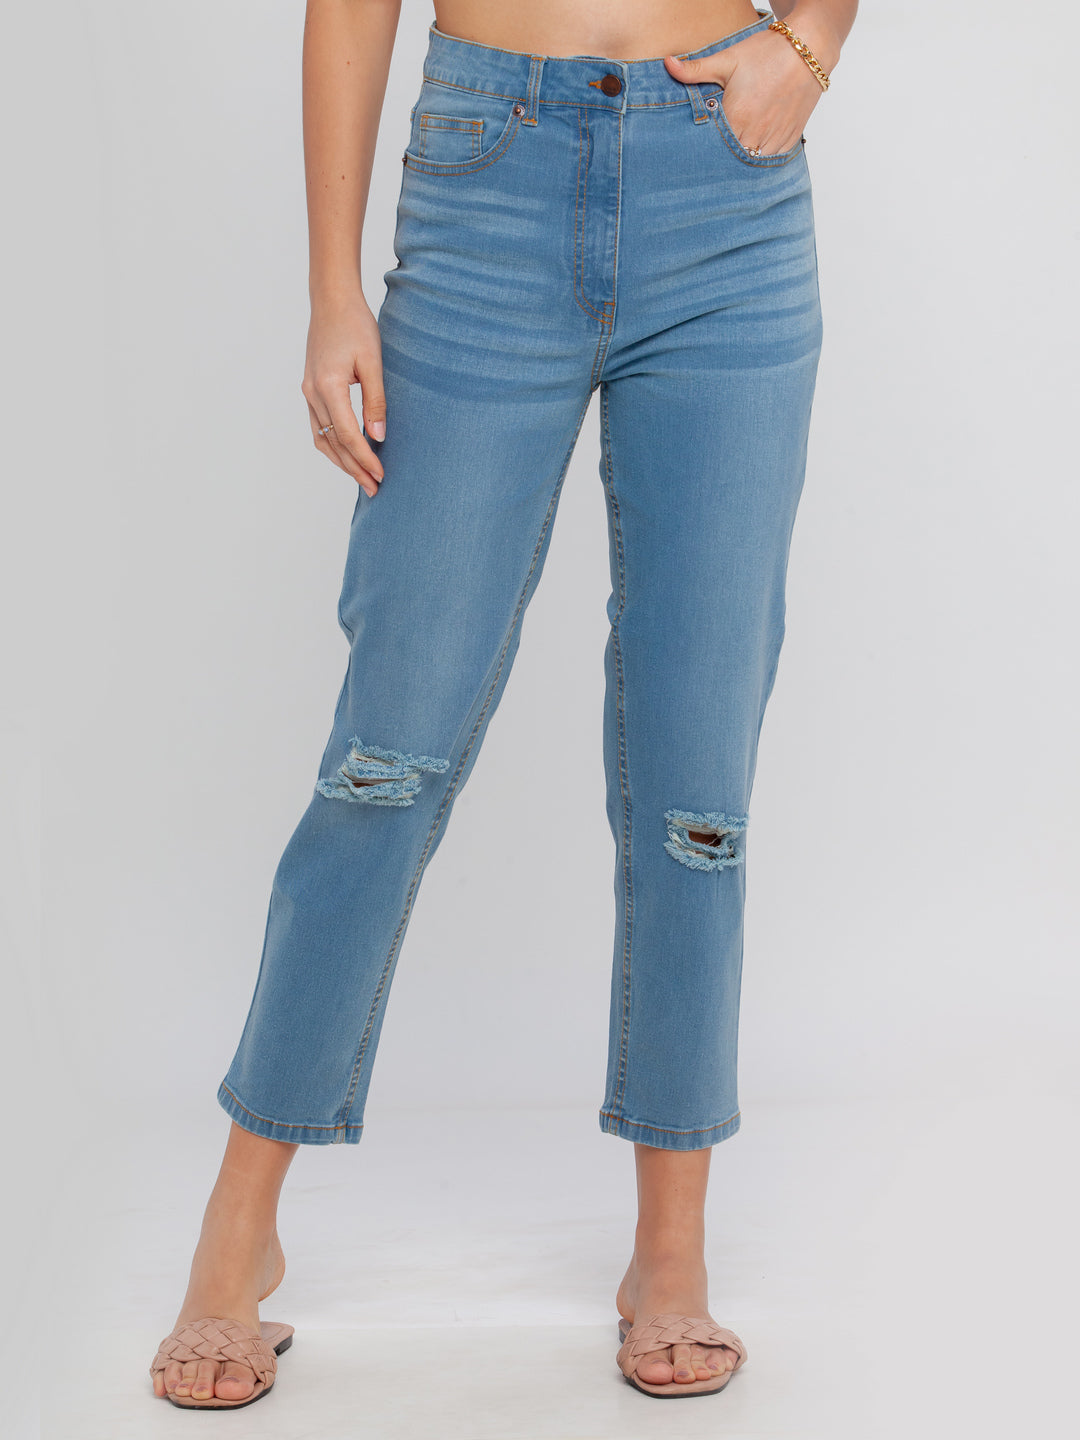 Blue Solid Jeans For Women